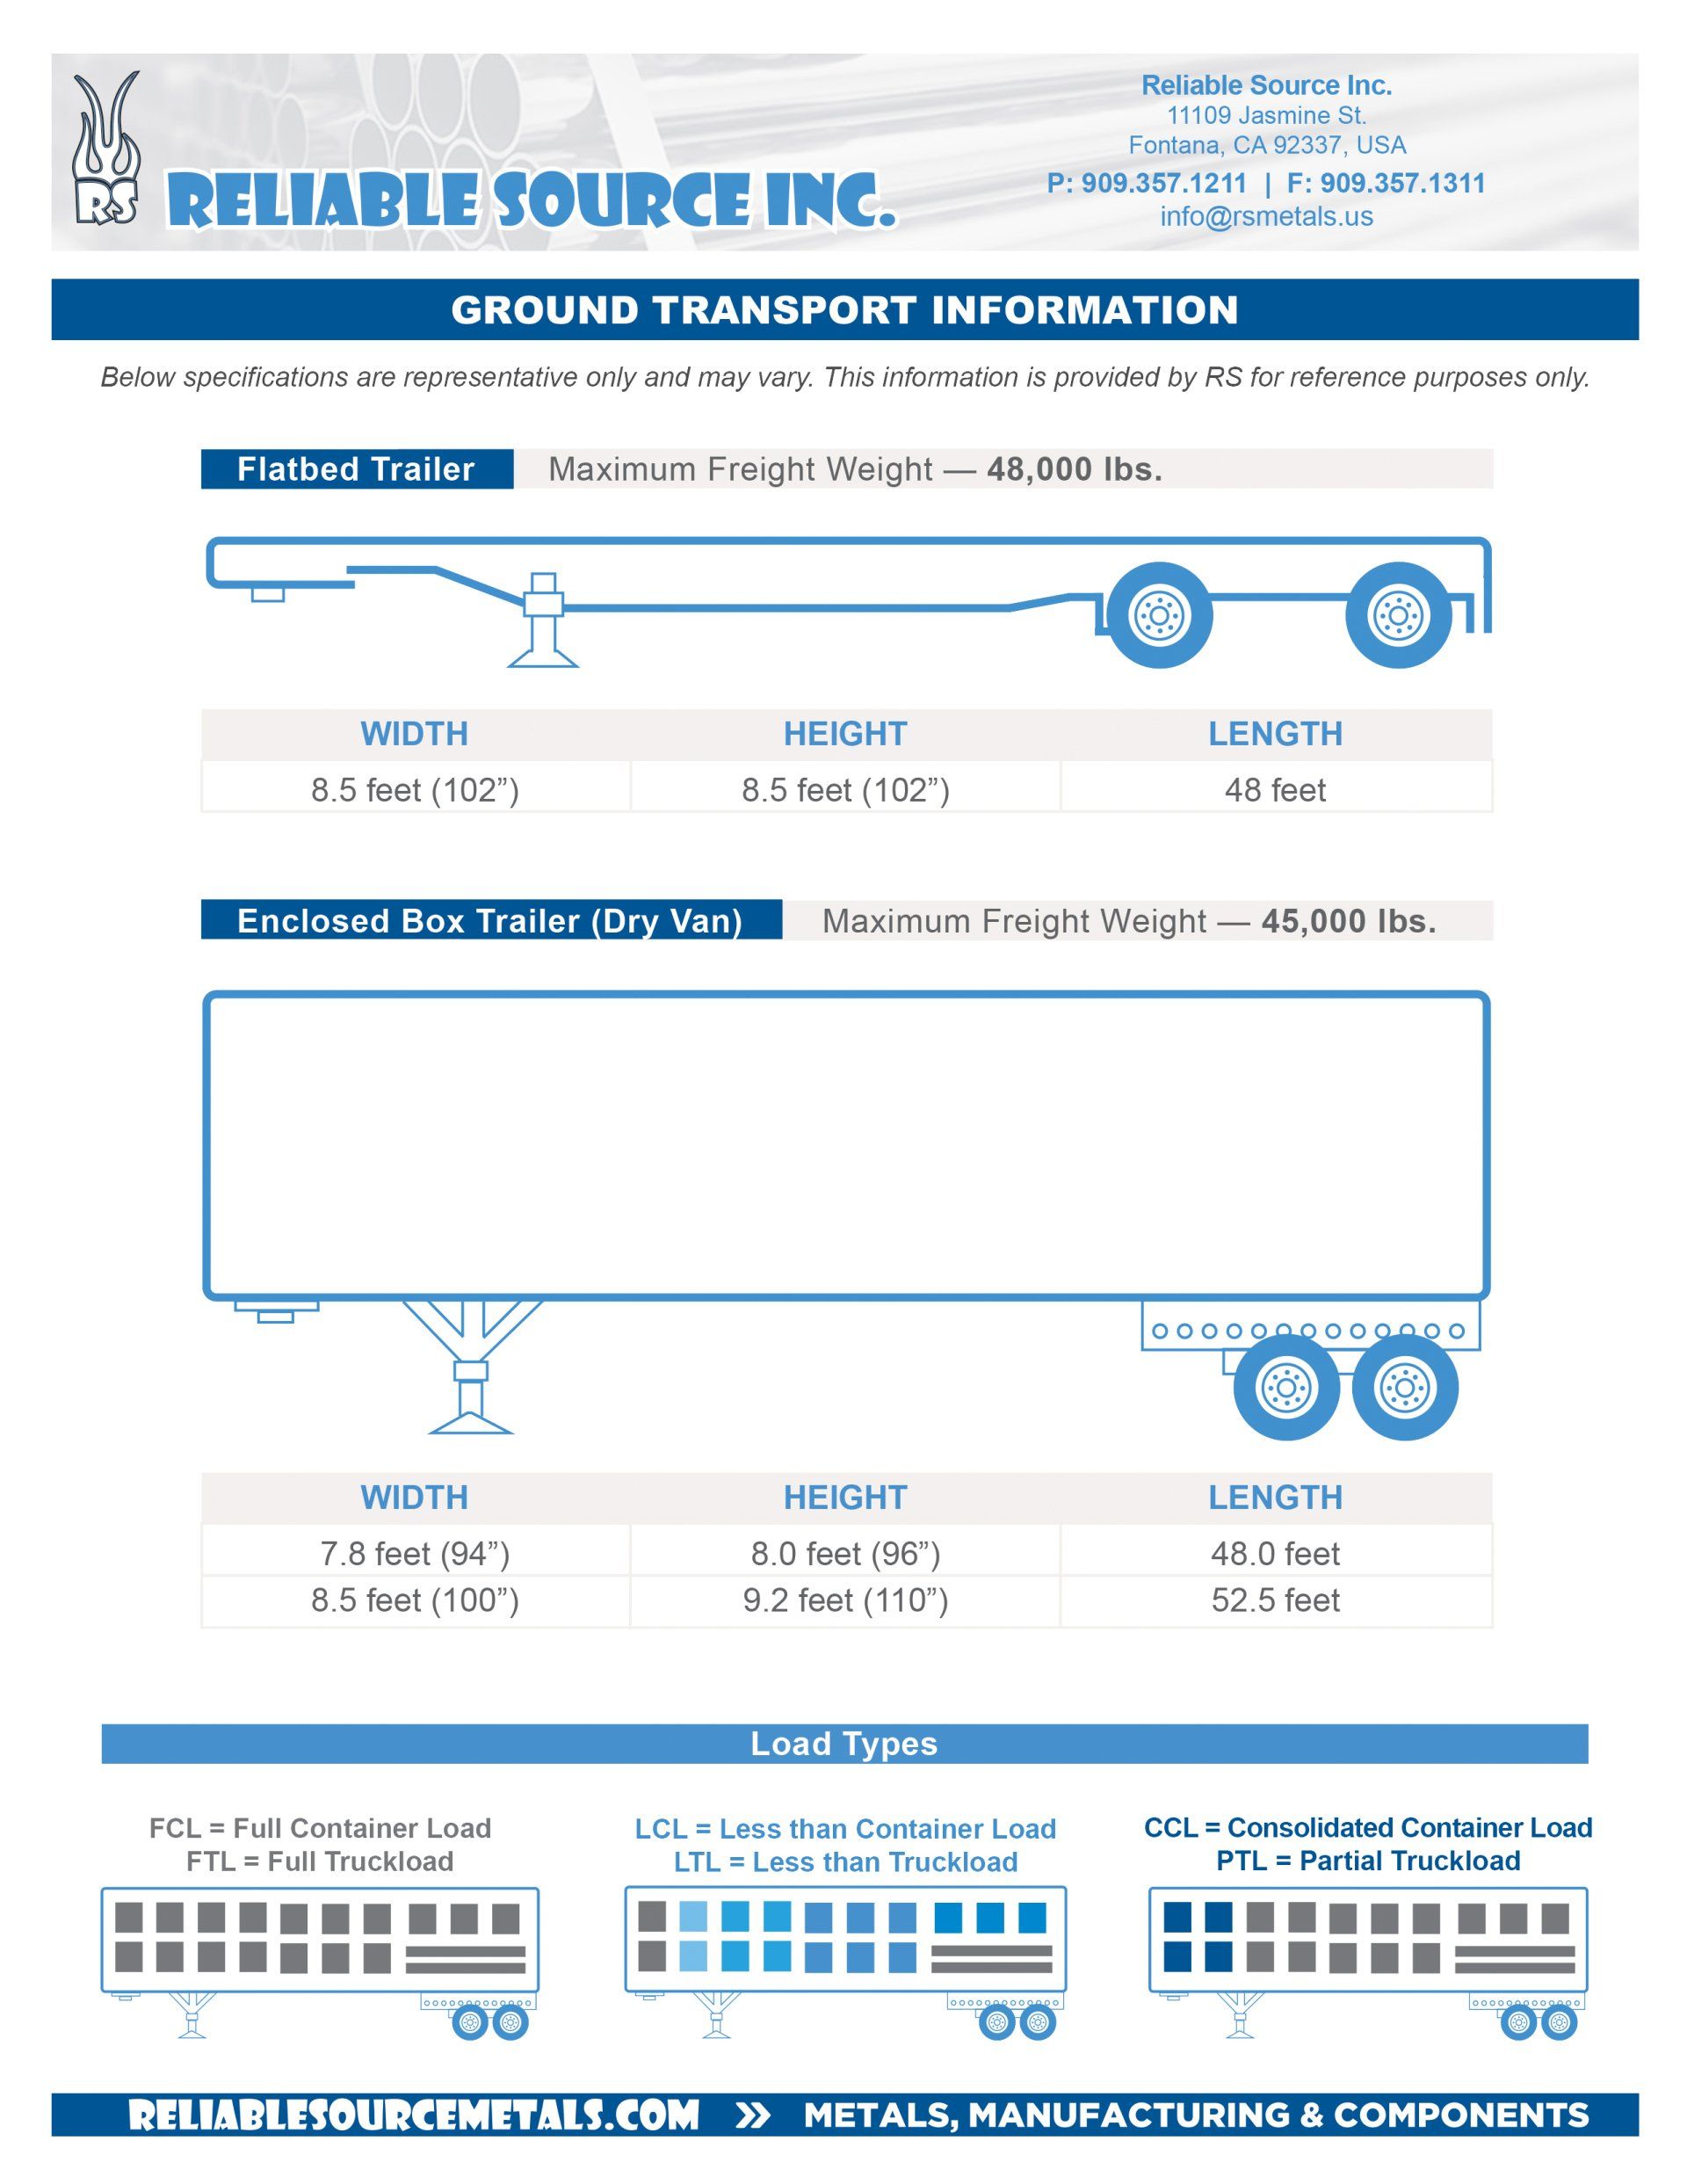 Shipping Information - Ground Transport